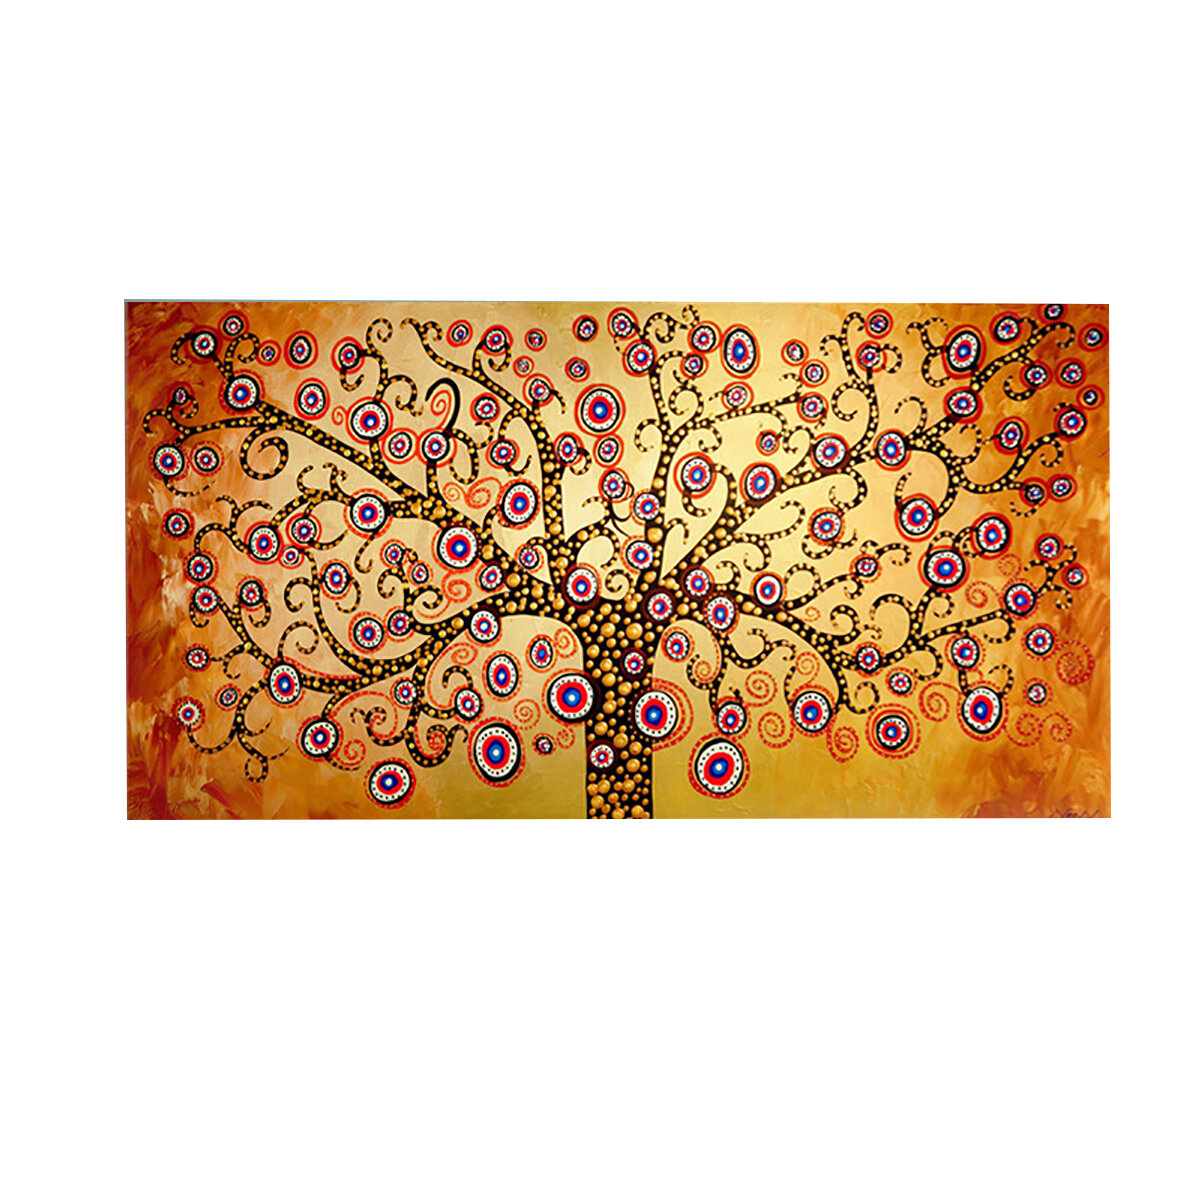 1pcs Canvas Oil Painting Wall Decor Yellow Abstract Tree Wall Hanging Decorative Art Pictures Framel